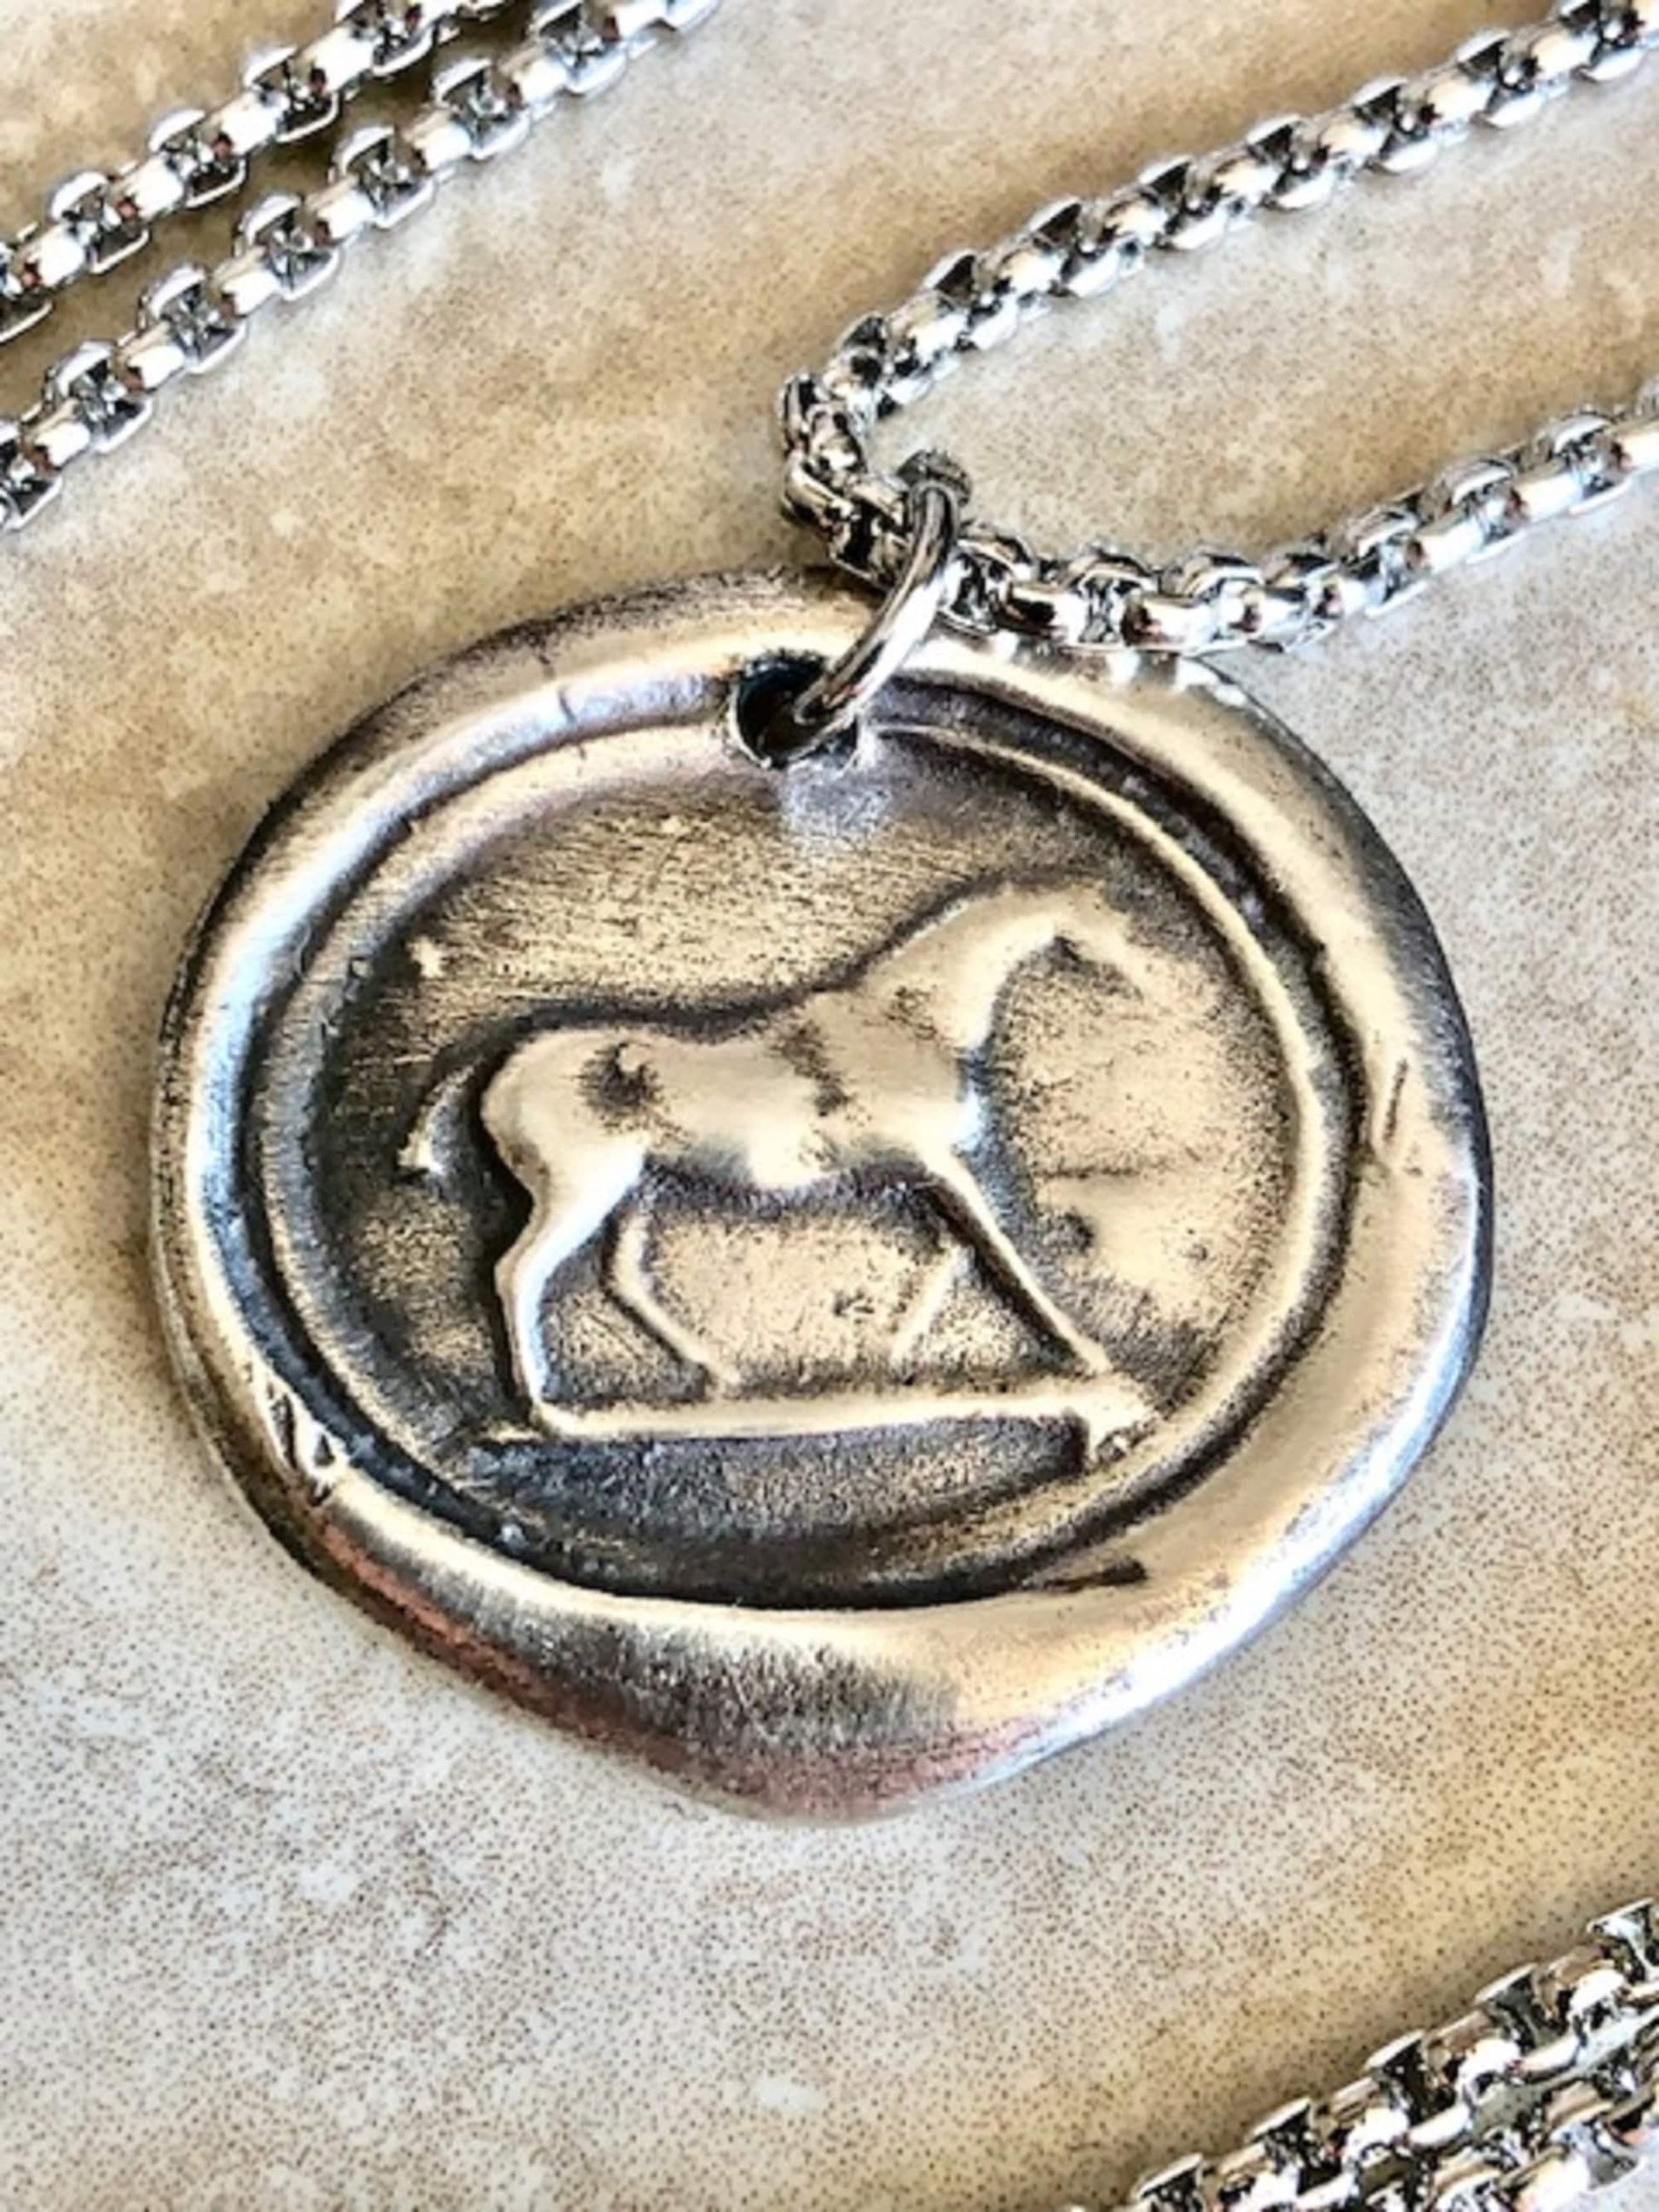 Blest Horse Silver Pendant Necklace - Protection and Luck - Jewelry From an Antique Silver Wax Seal - Jewelry From Charm Fascinations 110